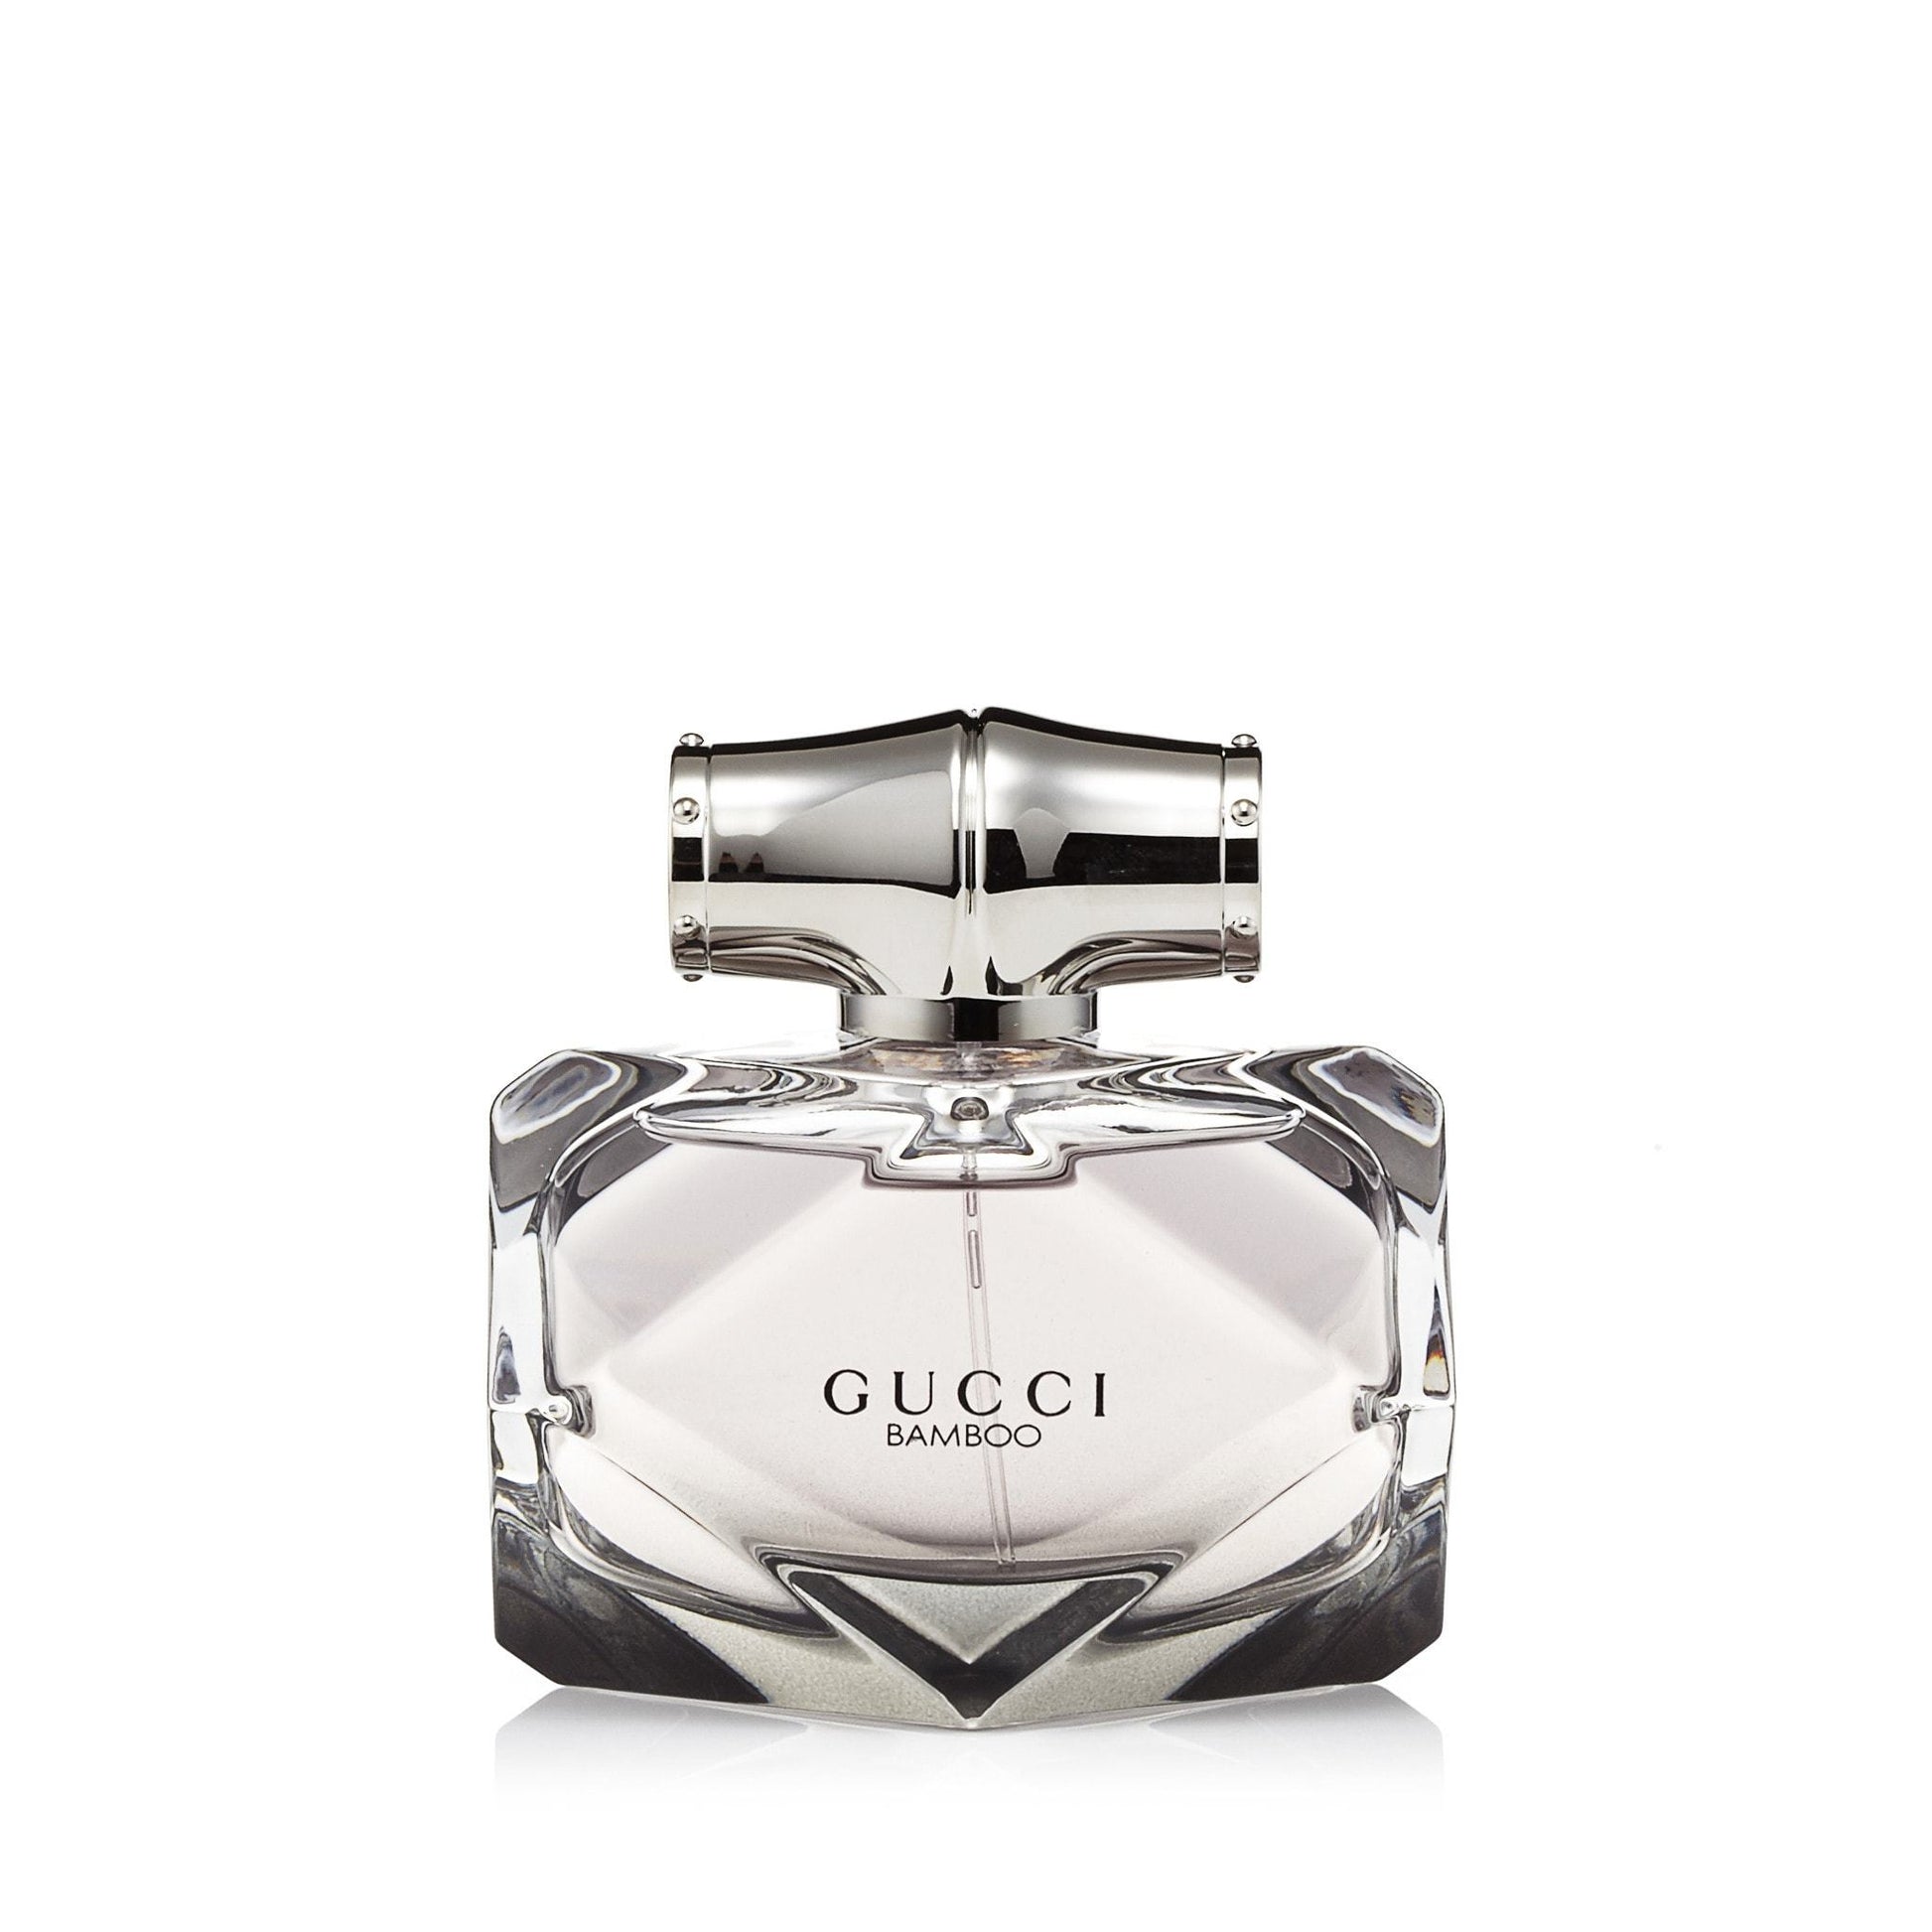 Bamboo Eau de Parfum Spray for Women by Gucci, Product image 2